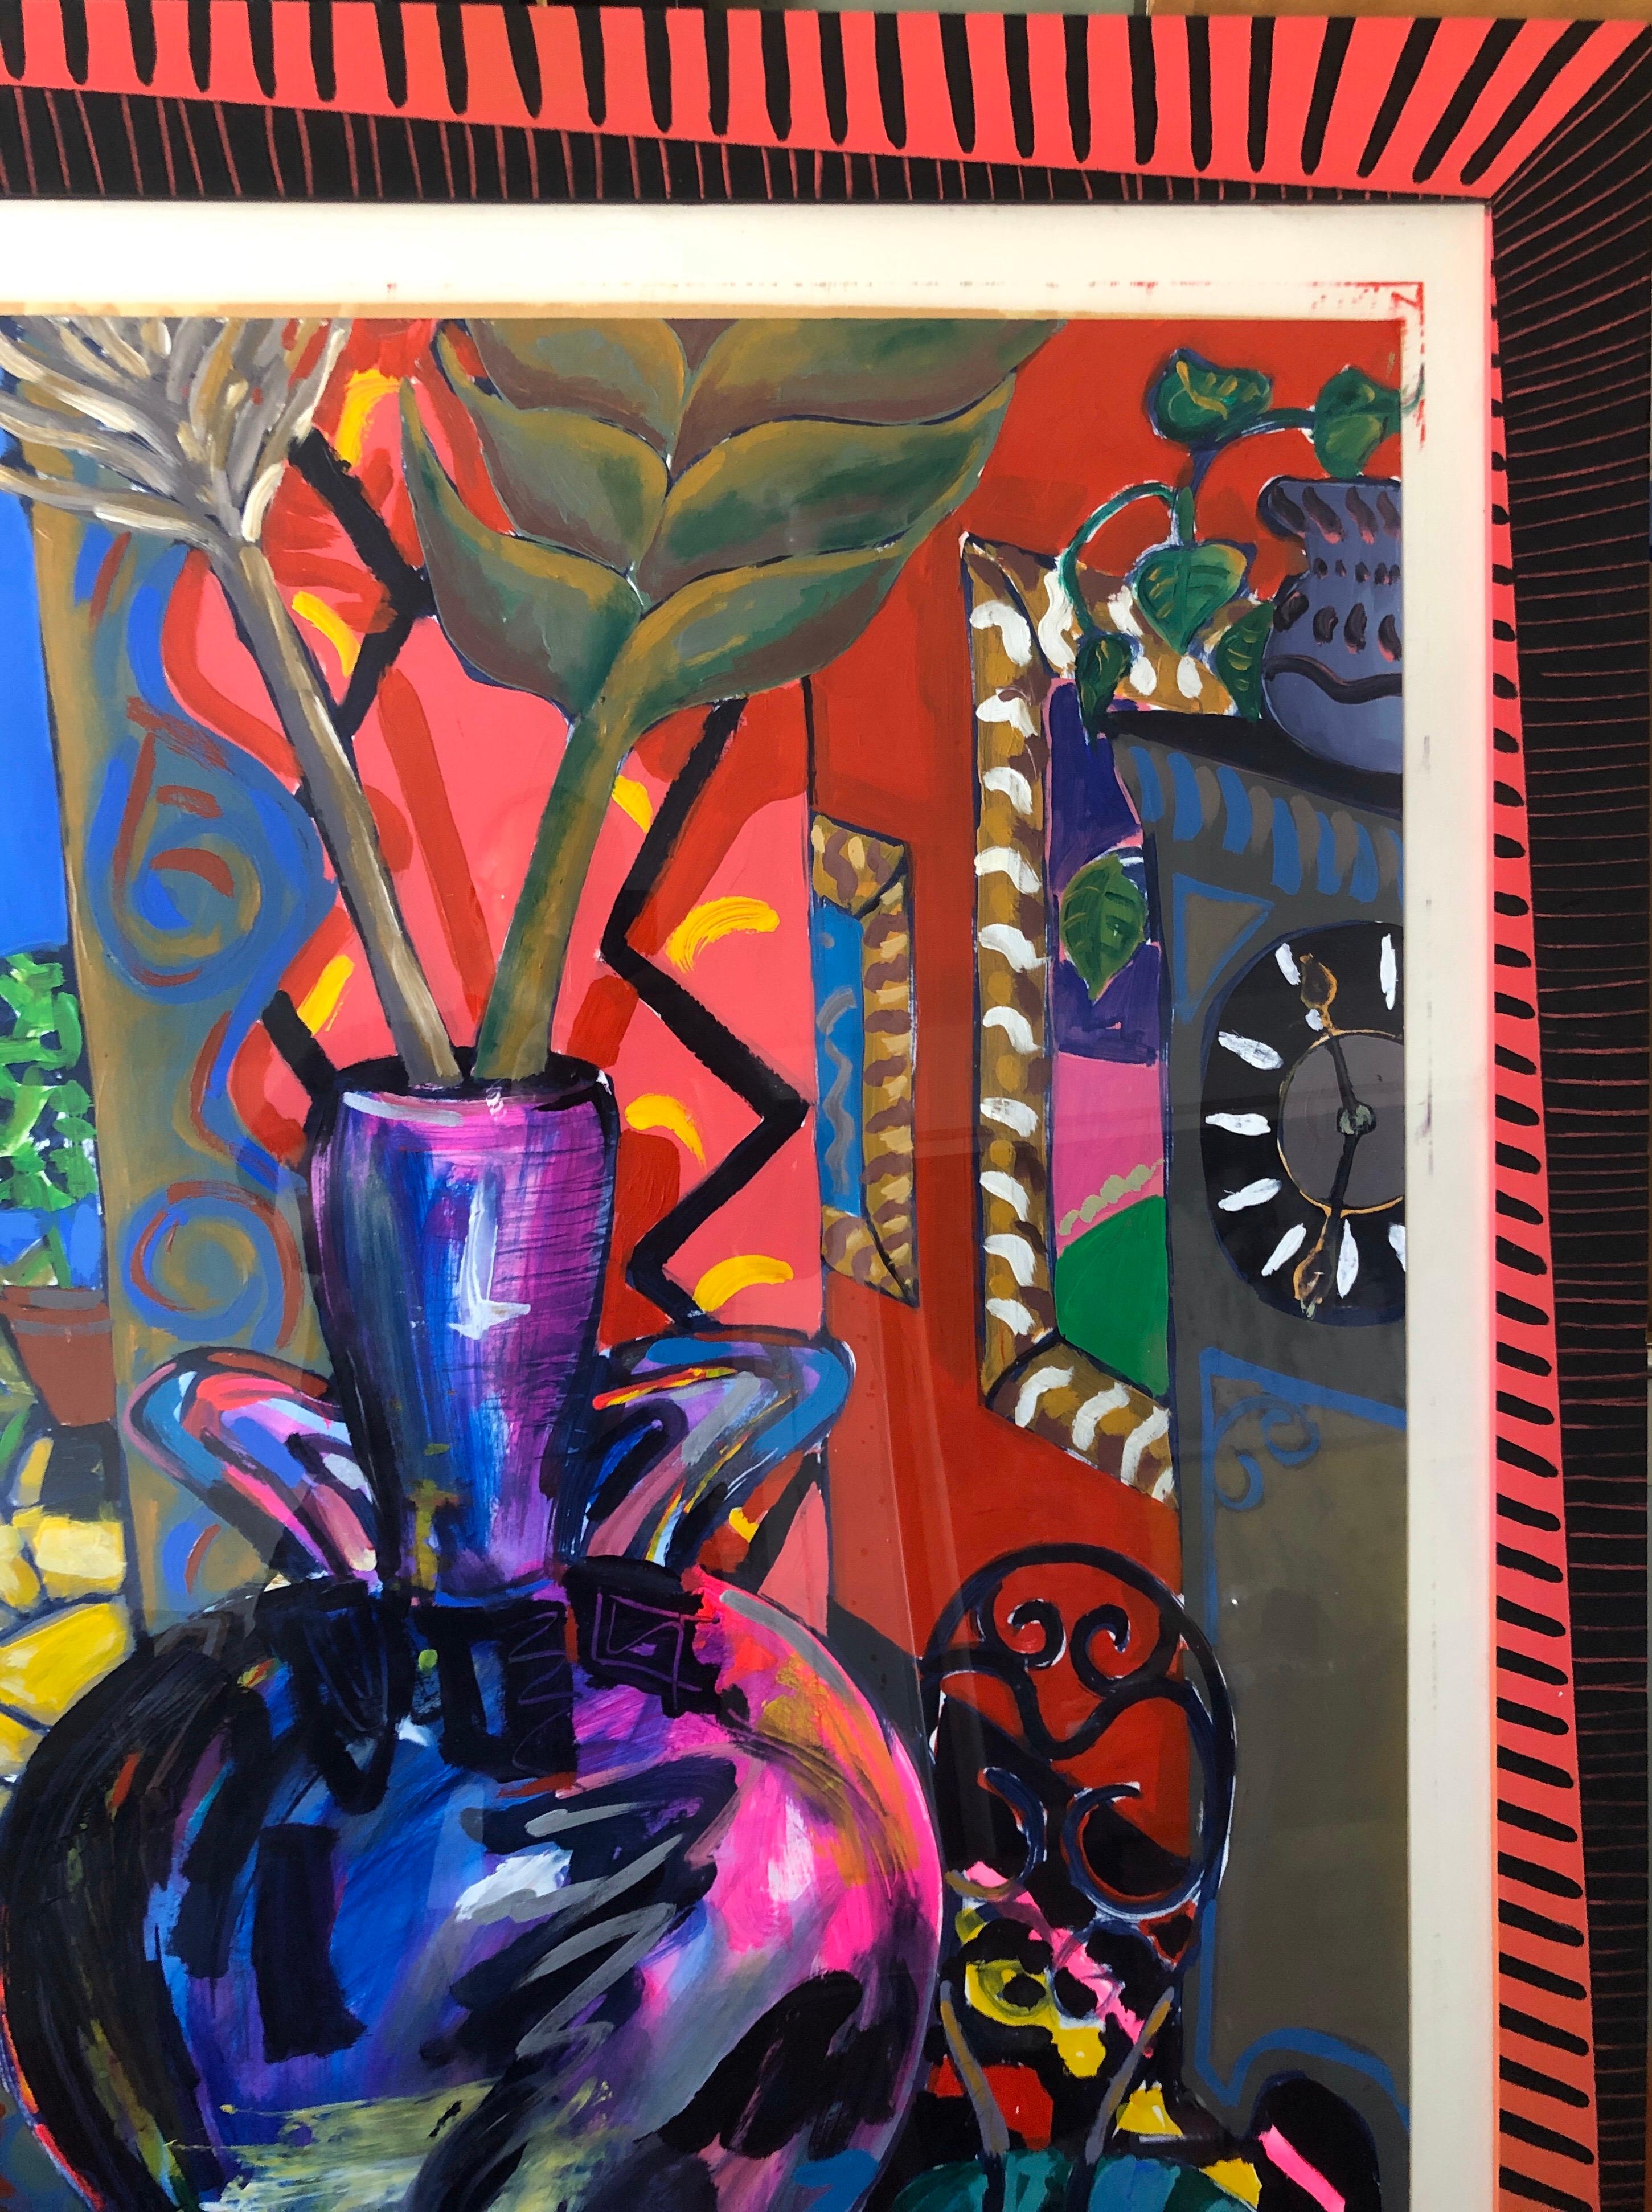 This is a bright, vibrant, colorful Amanda Watt original acrylic painting on paper depicting an interior  scene with a floral vase on round table. with a basket of fresh fruits and a grandfather clock.  
Provenance: Portico New York (bears their